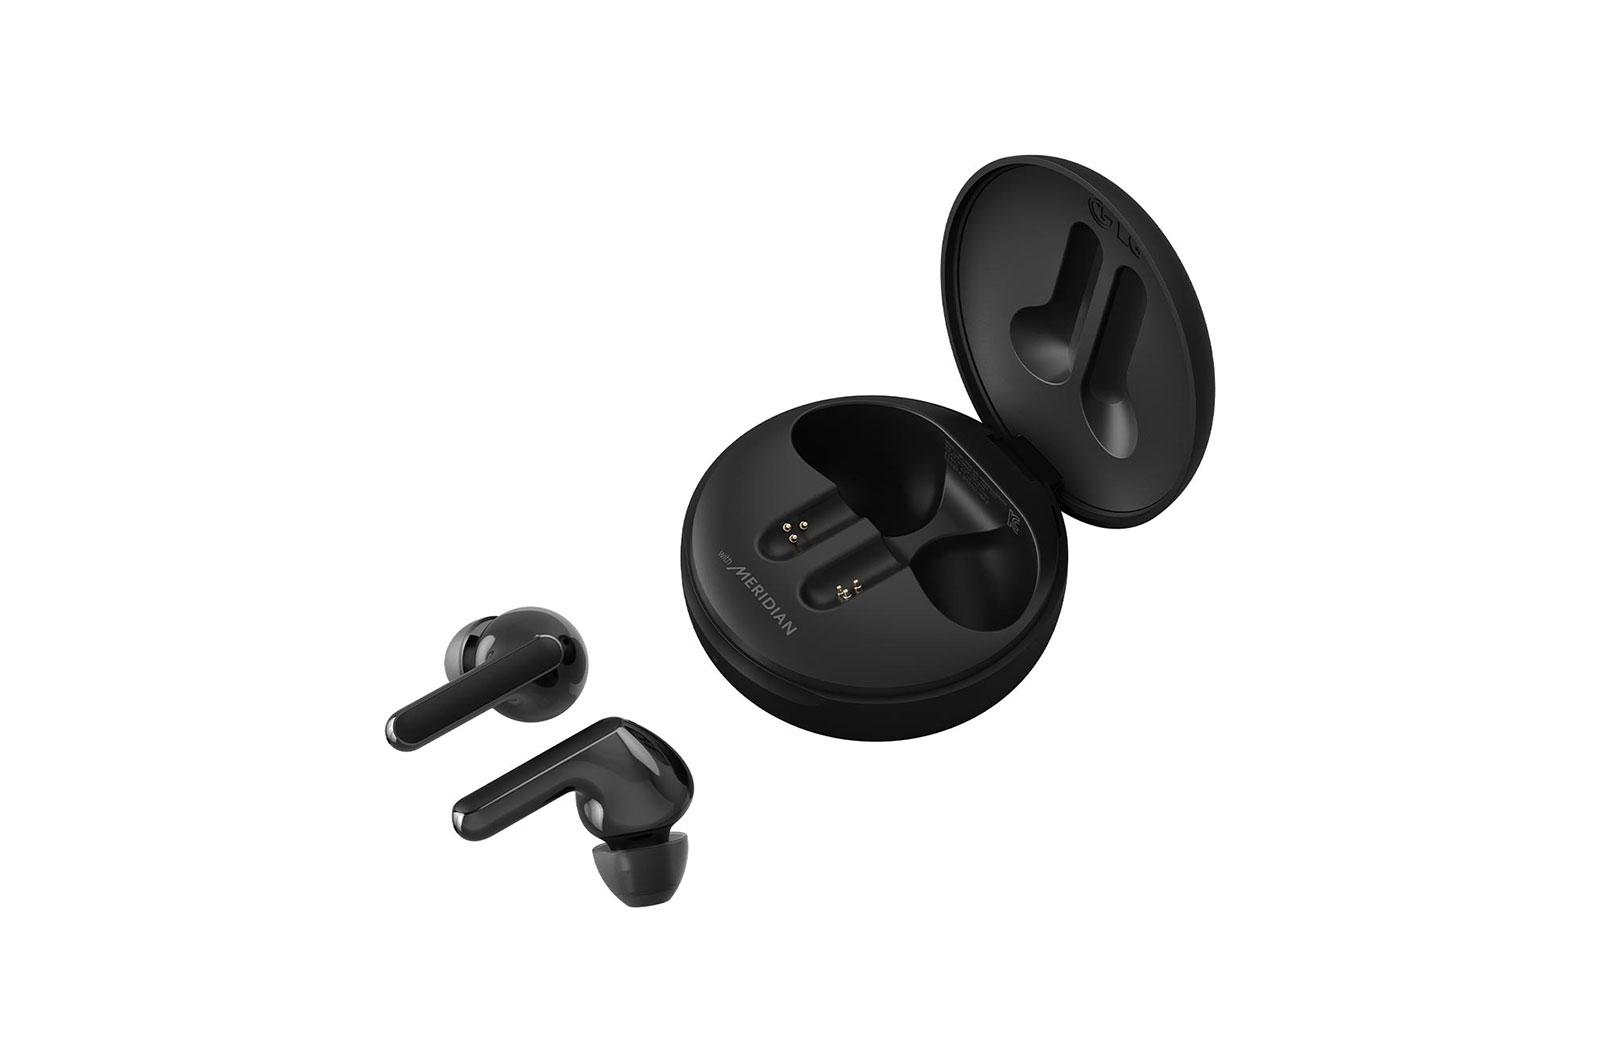 LG Has Released Self-Disinfecting Earbuds